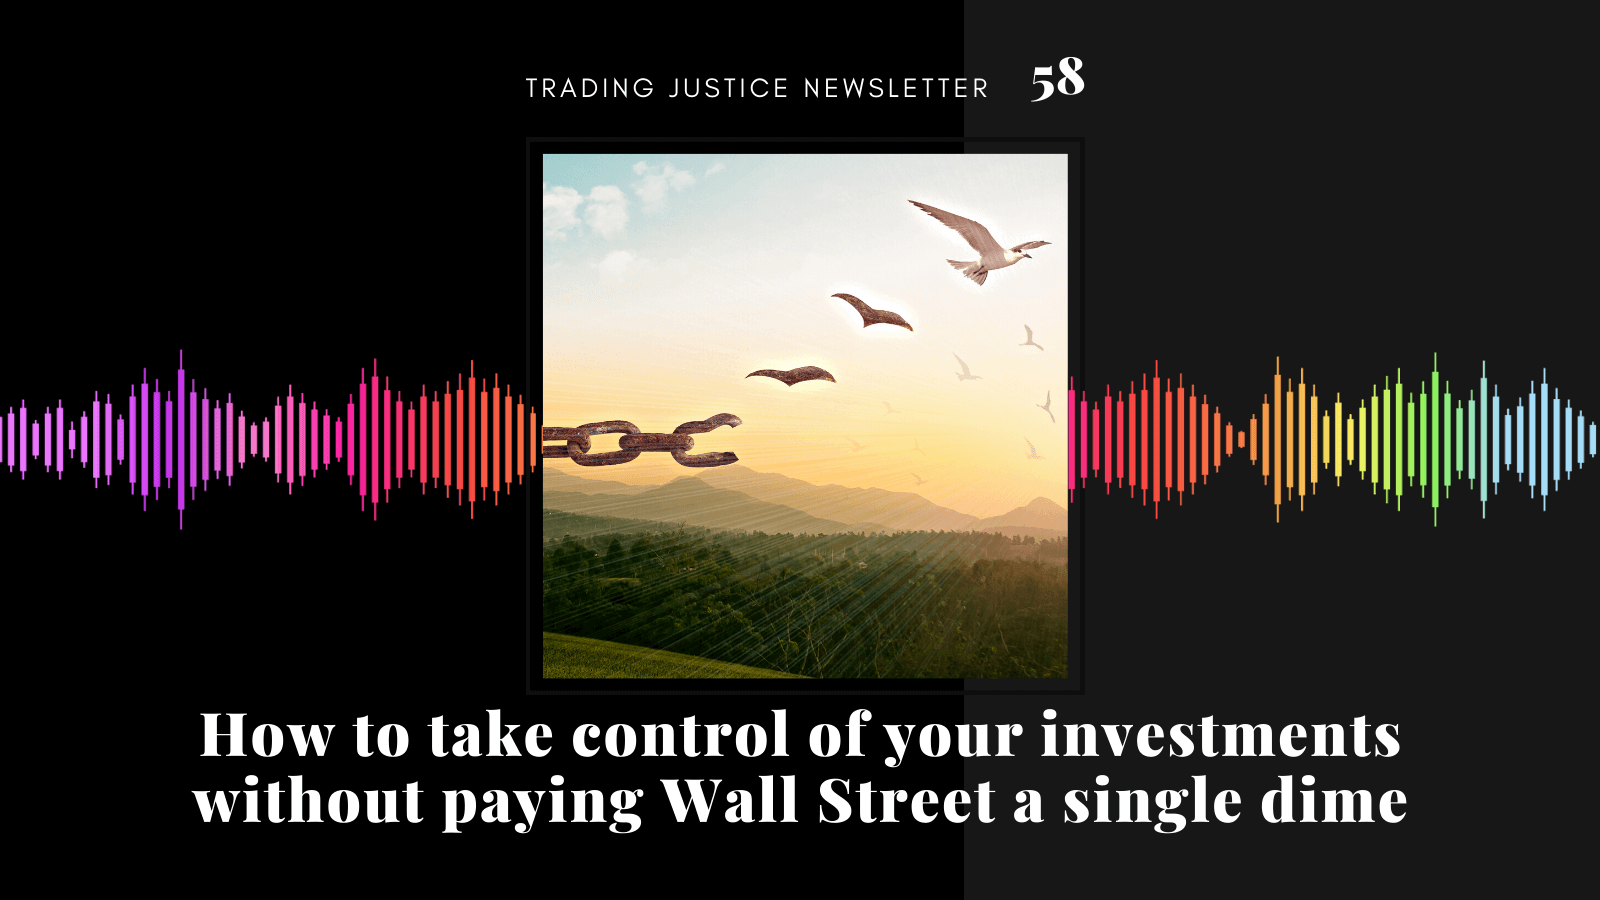 How to take control of your investments without paying Wall Street a single dime | Trading Justice Newsletter Vol. 58